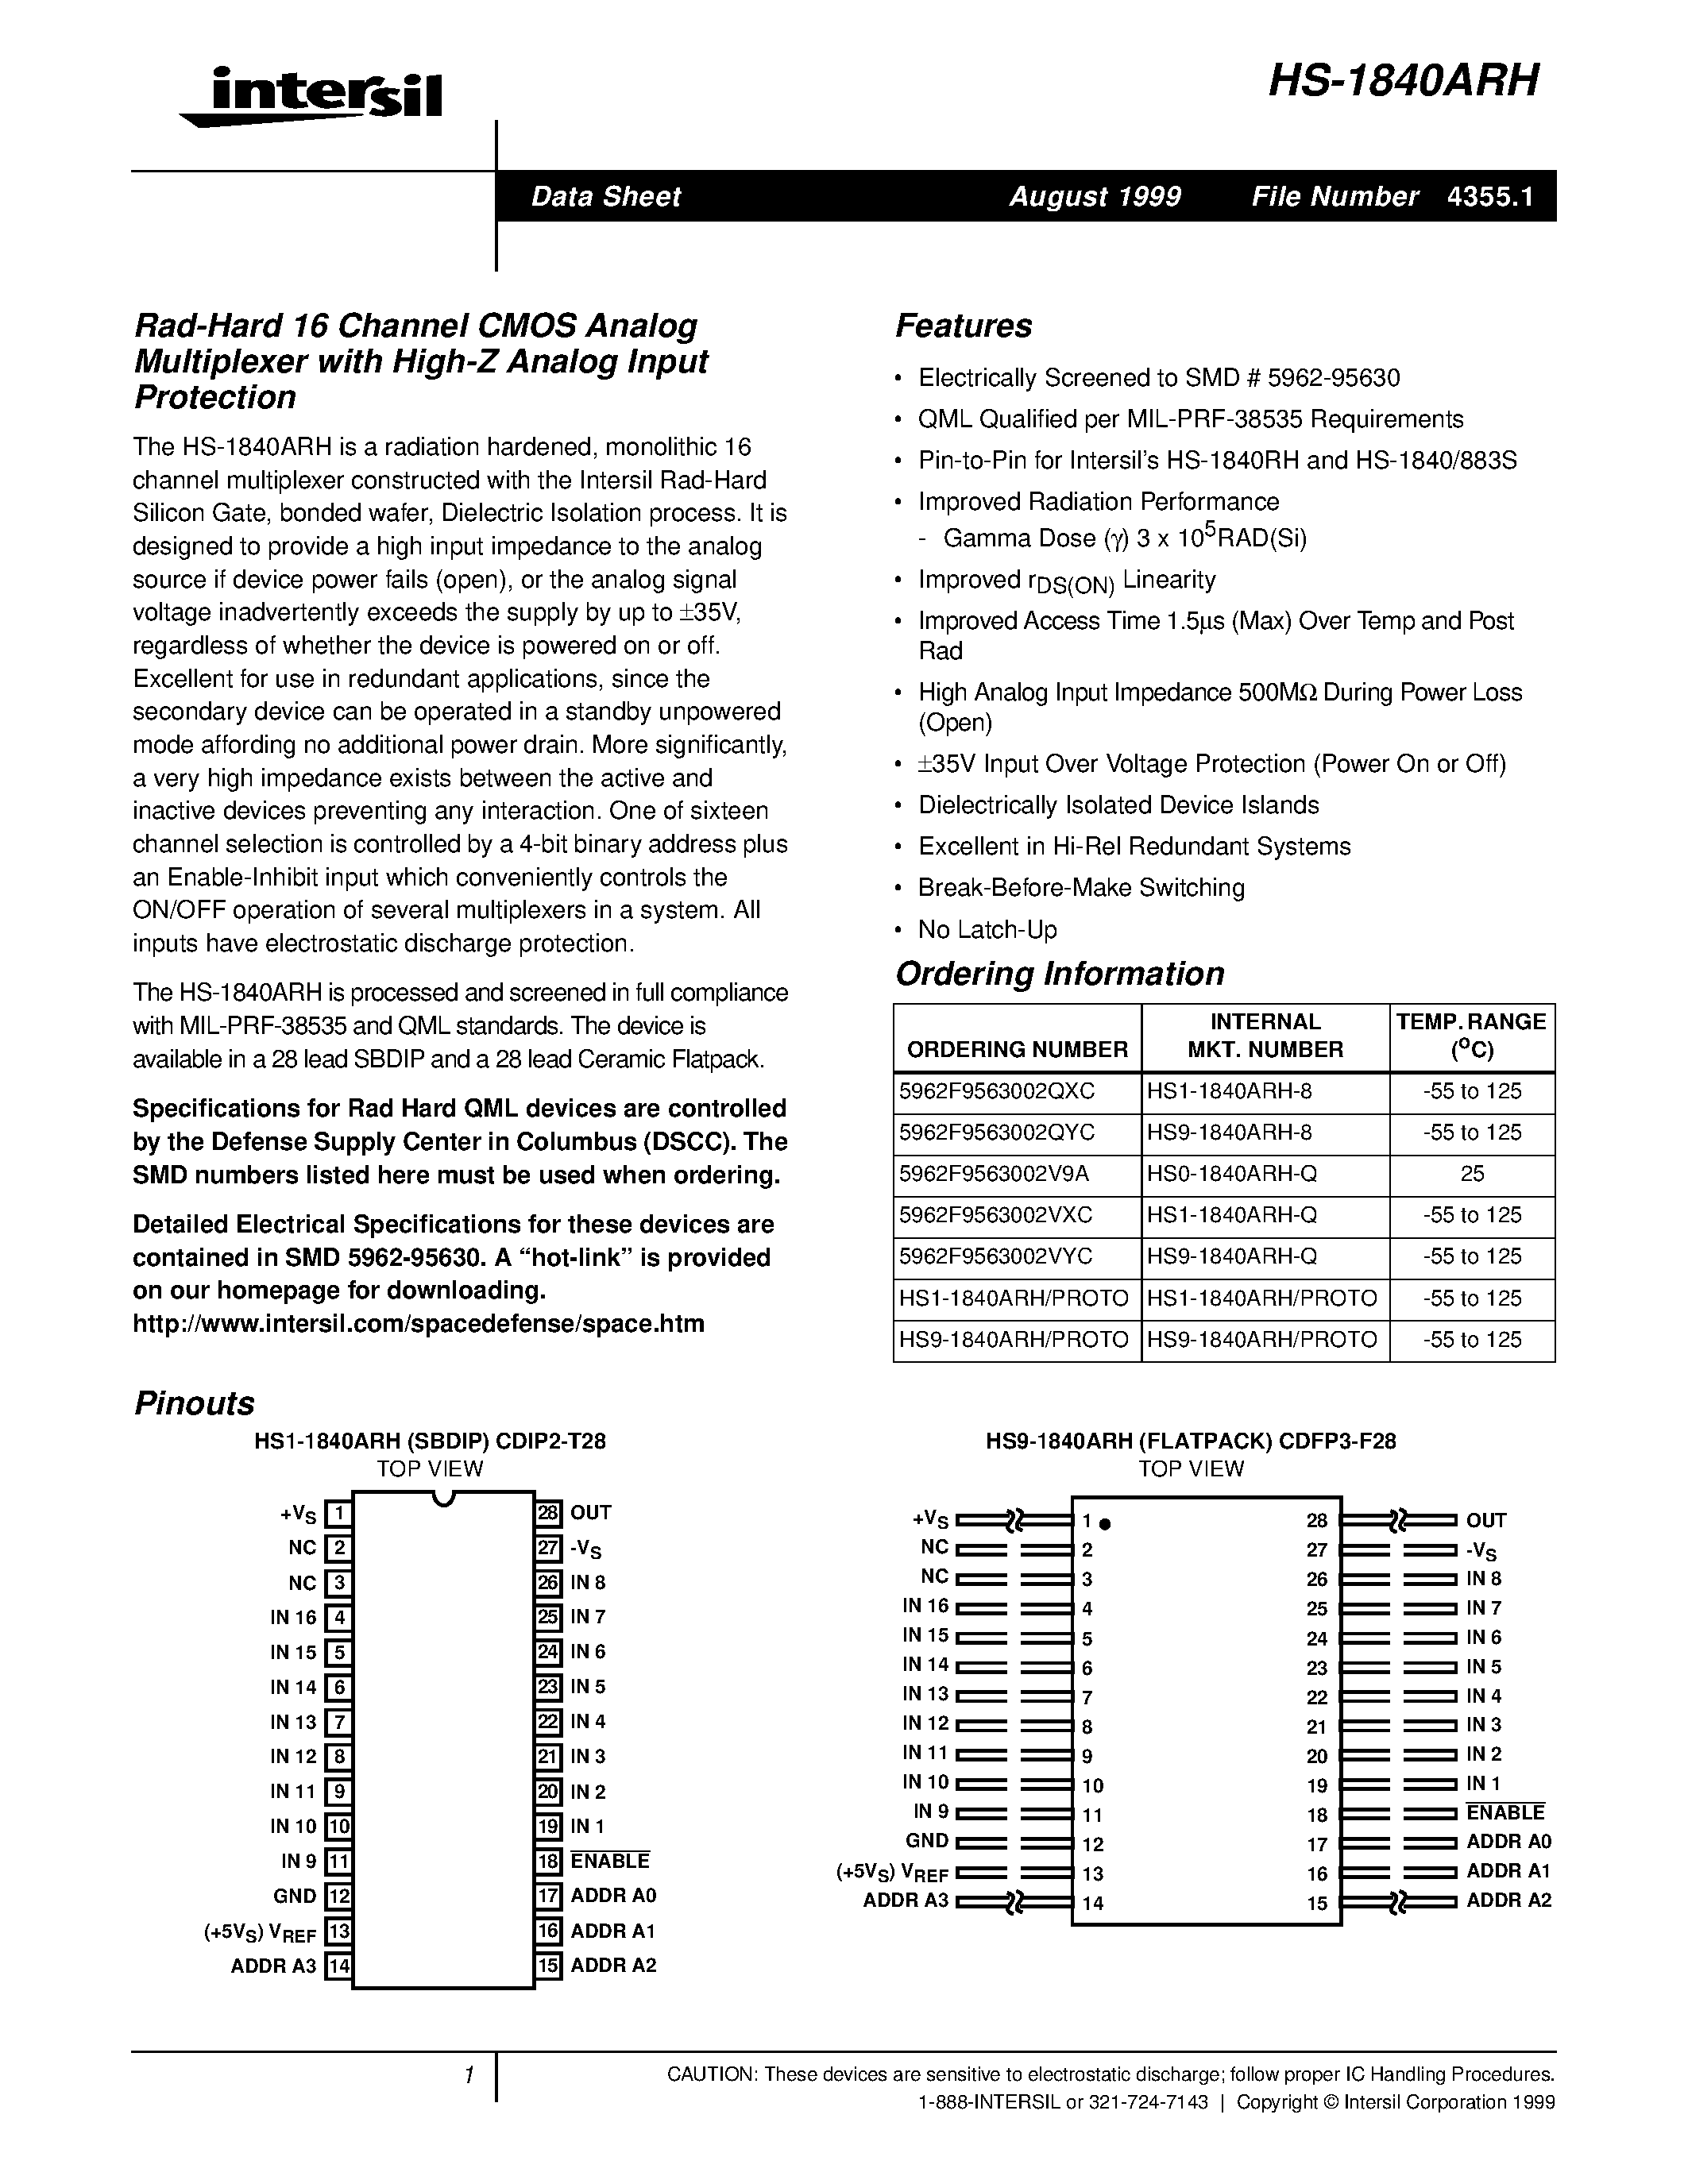 Datasheet HS-1840ARH - Rad-Hard 16 Channel CMOS Analog Multiplexer with High-Z Analog Input Protection page 1